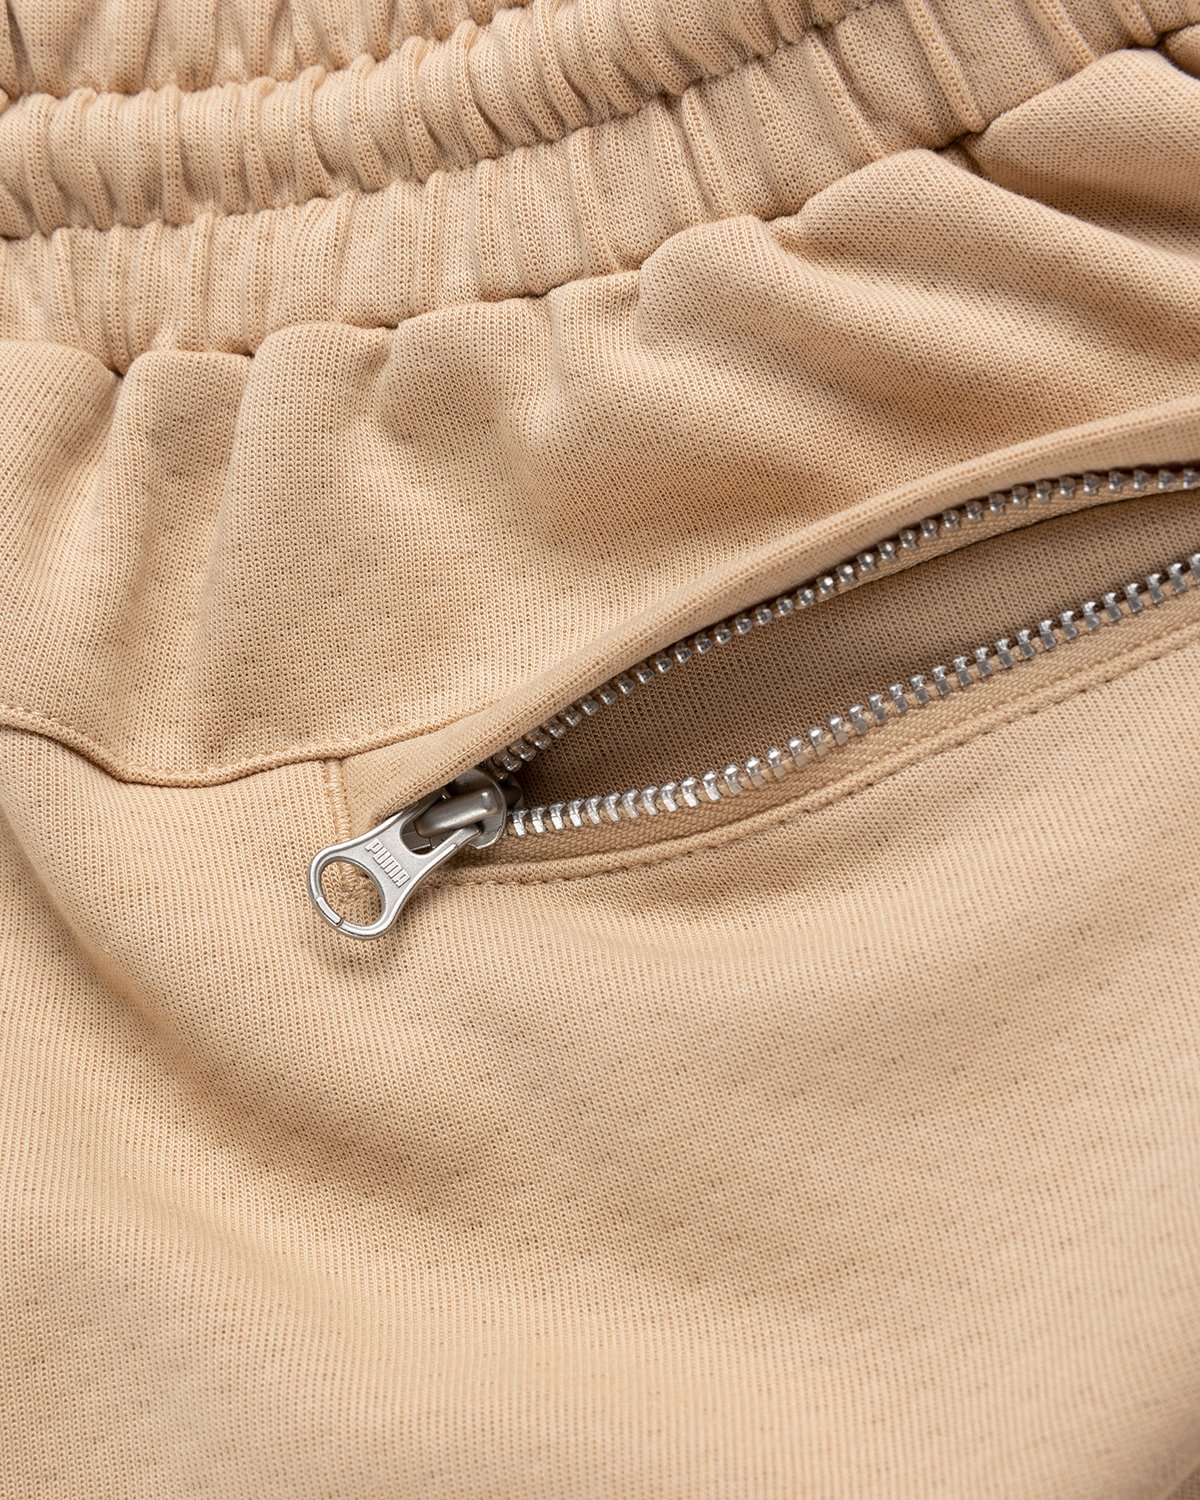 Puma x AMI - Wide Logo Pants Ginger Root - Clothing - Beige - Image 5